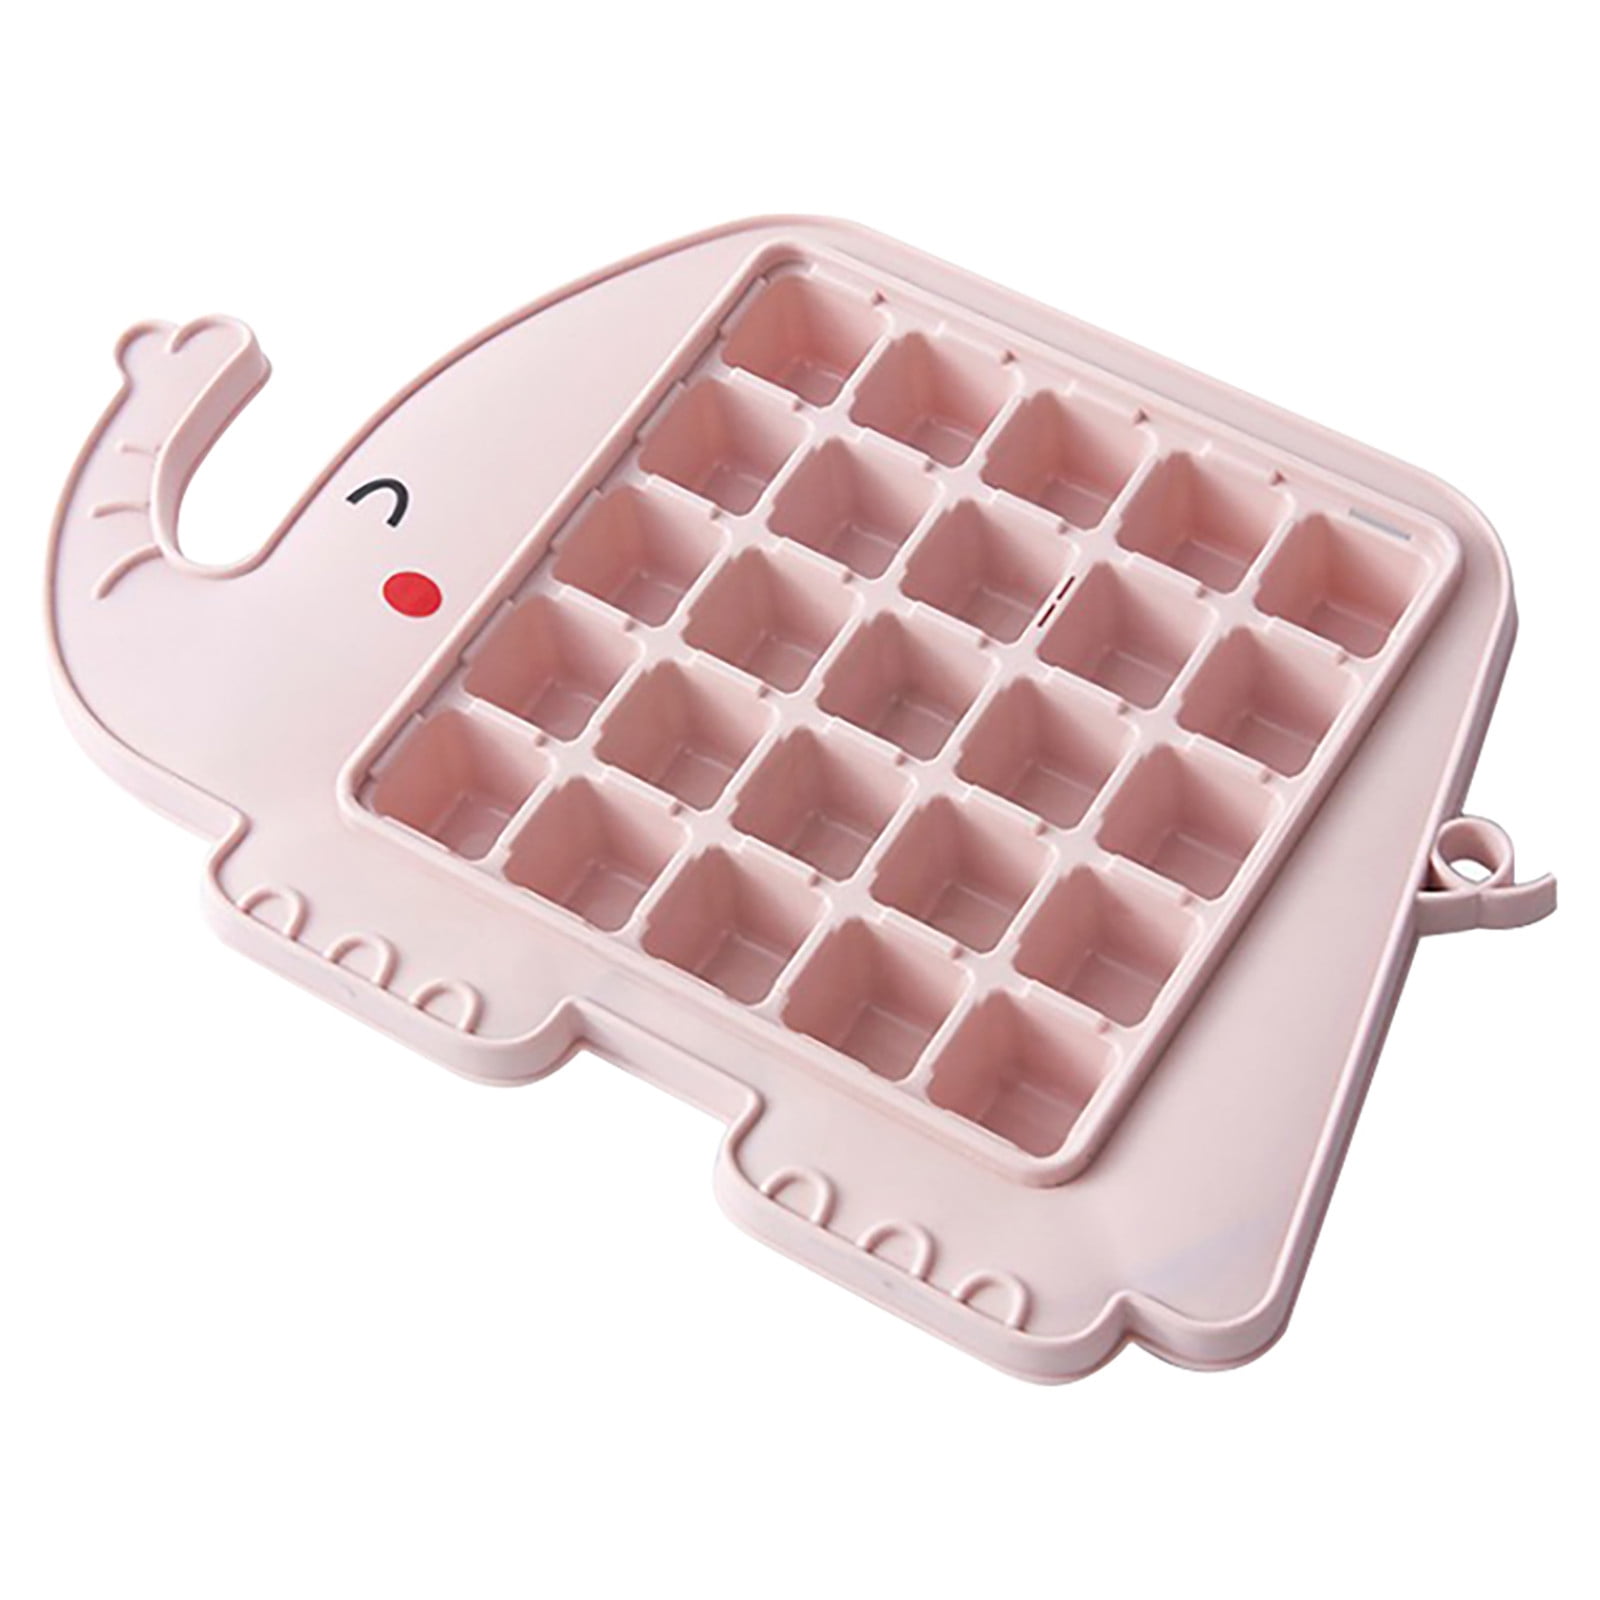 Polar Ice Tray - Square Bamboo Series -Crystal Clear Ice Maker Pink